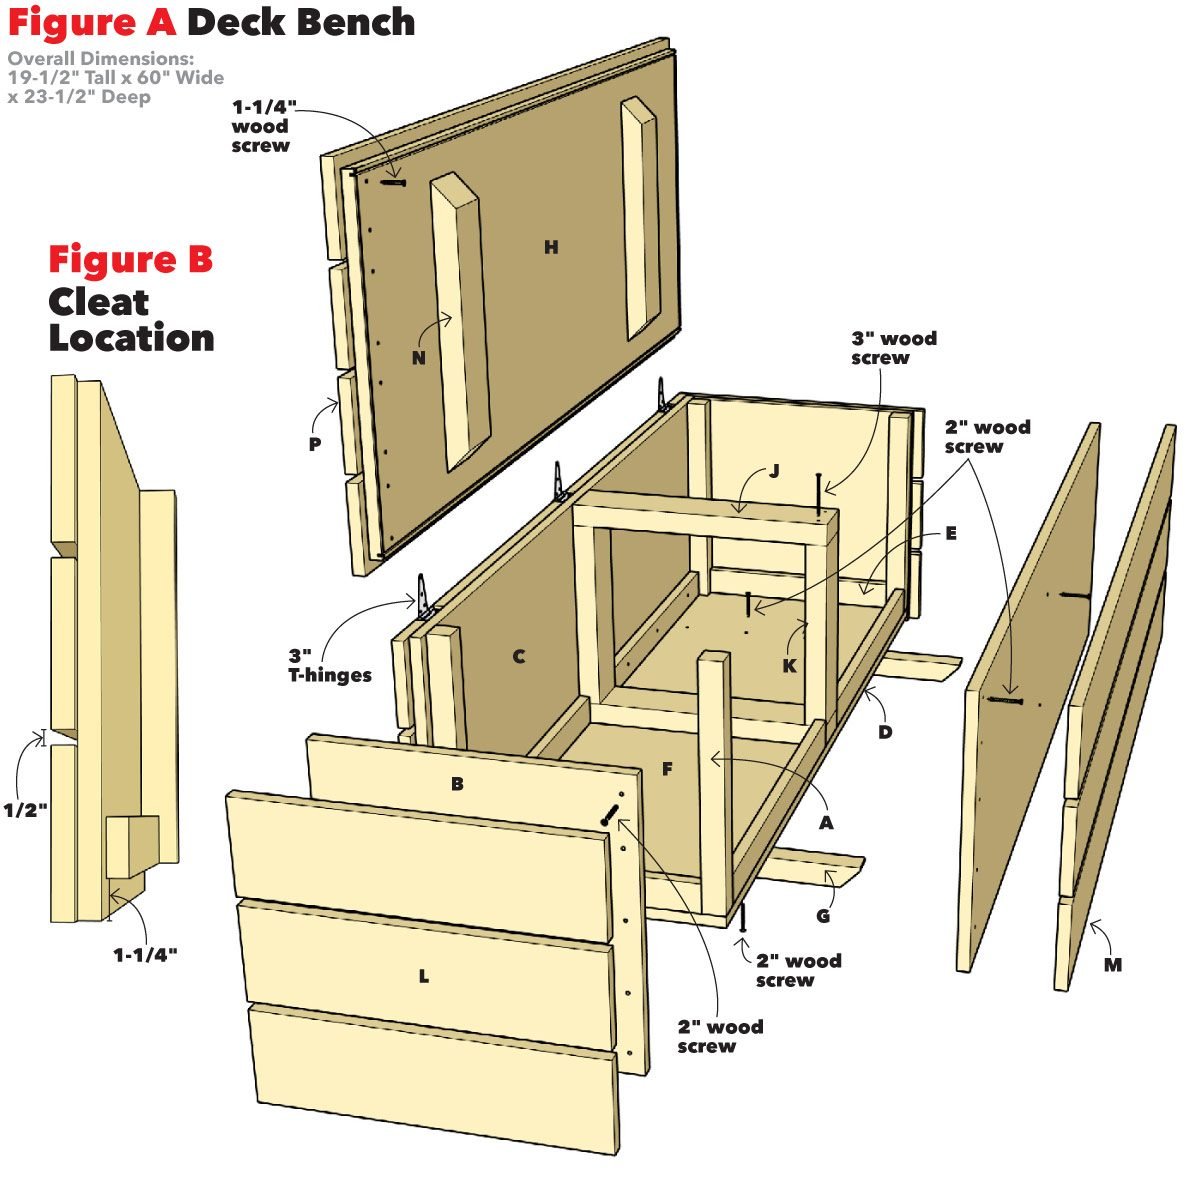 How to Build an Outdoor Storage Bench (DIY) | Family Handyman